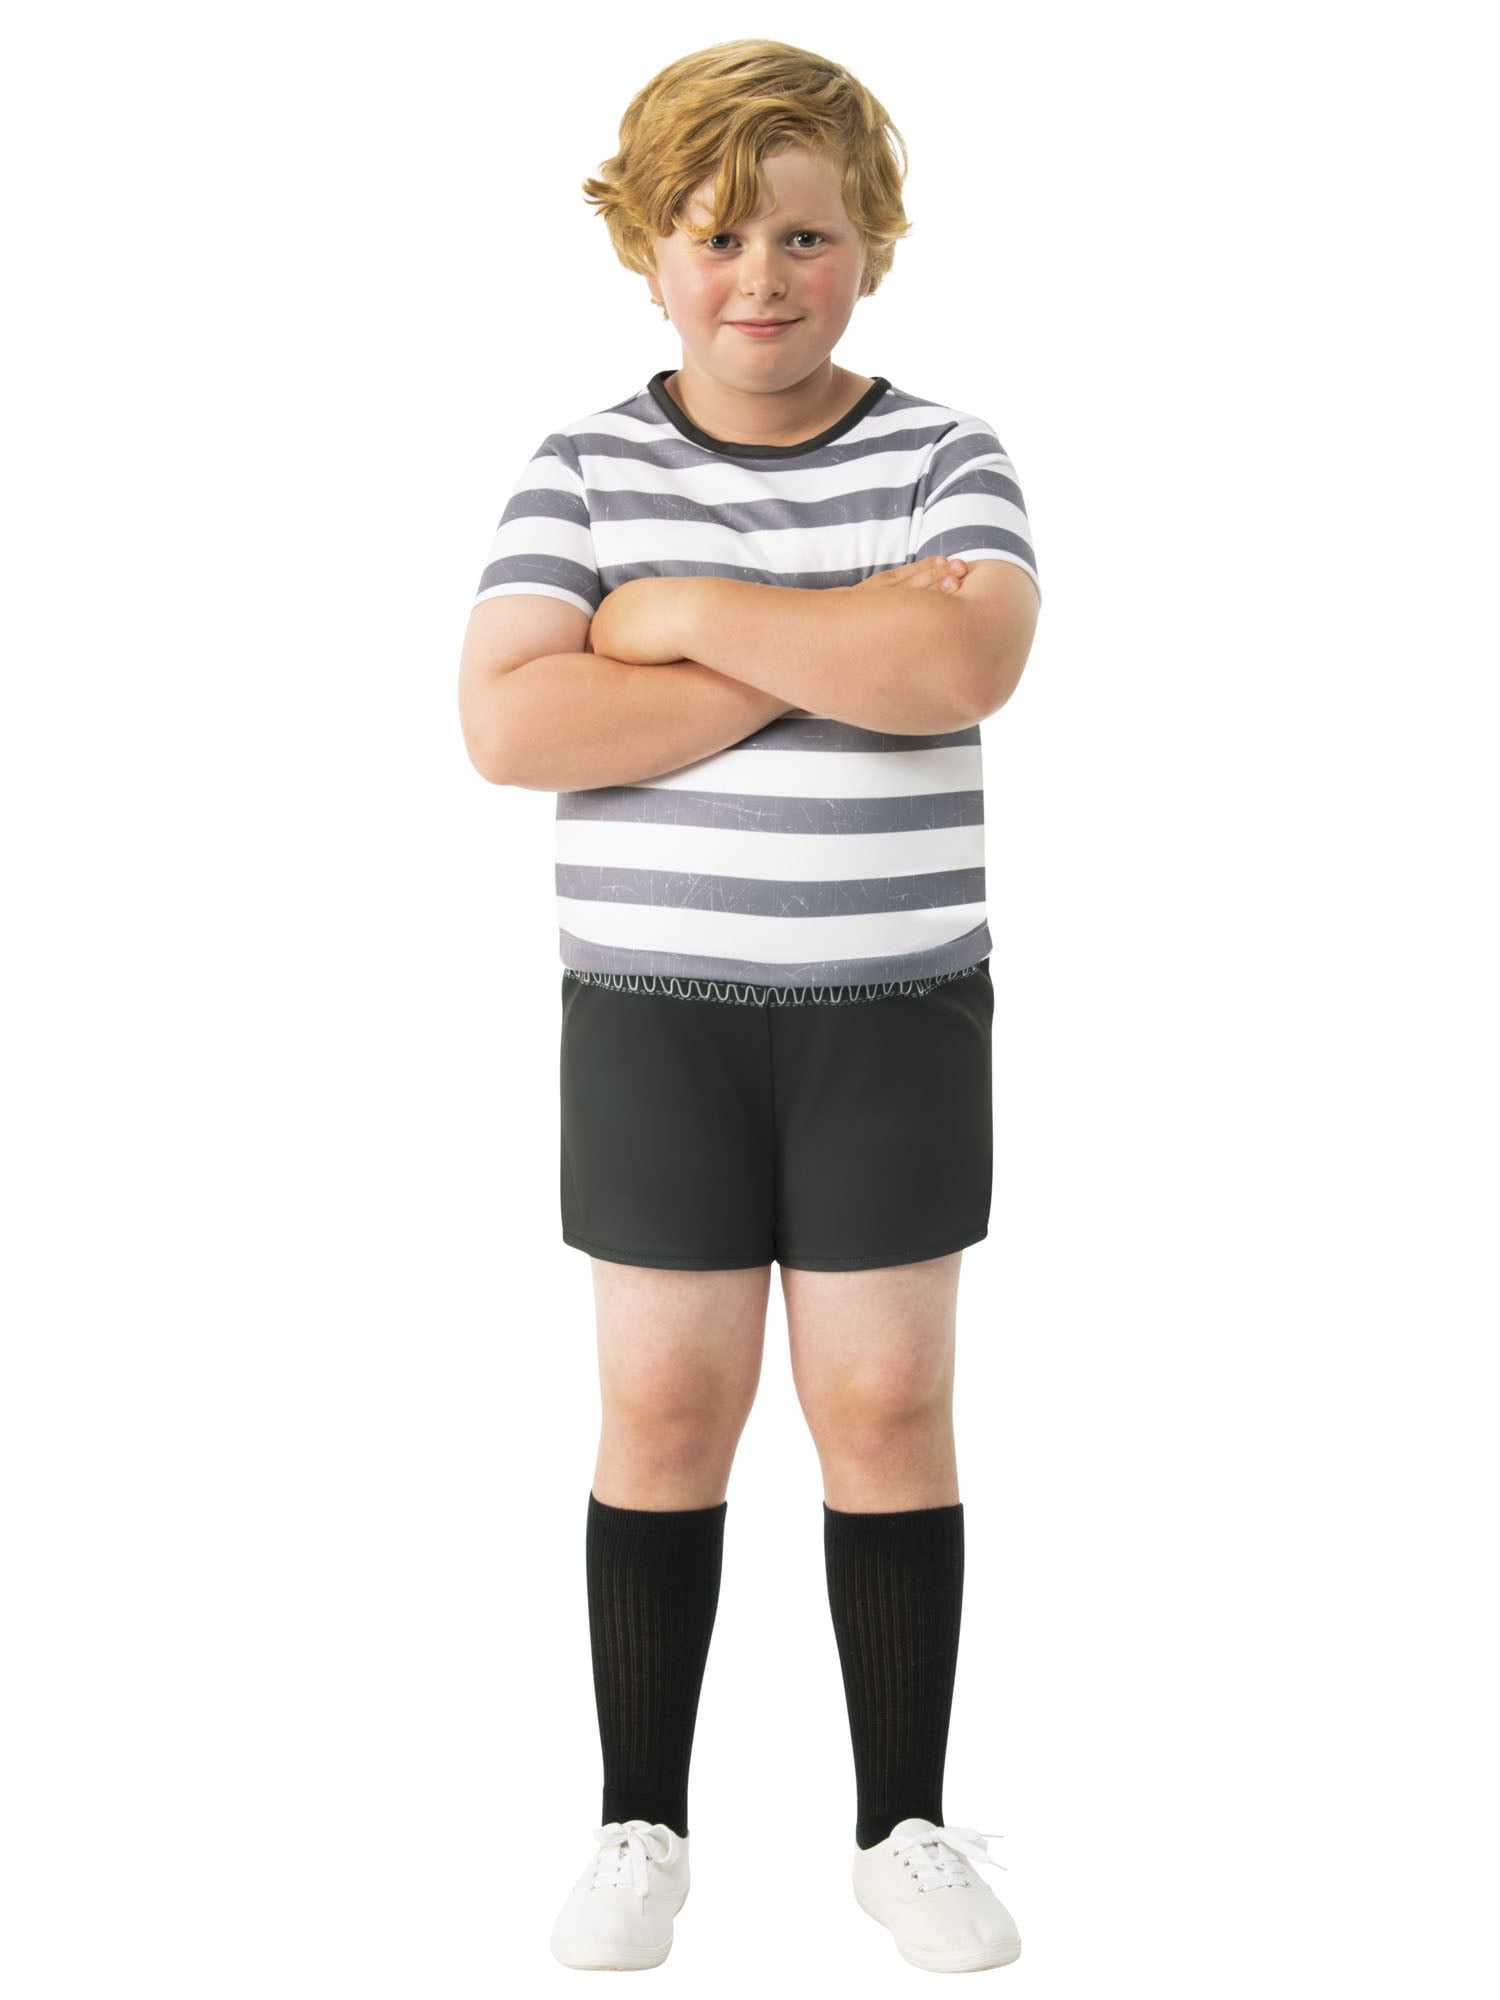 Pugsley Addams In The Addams Family Wallpapers